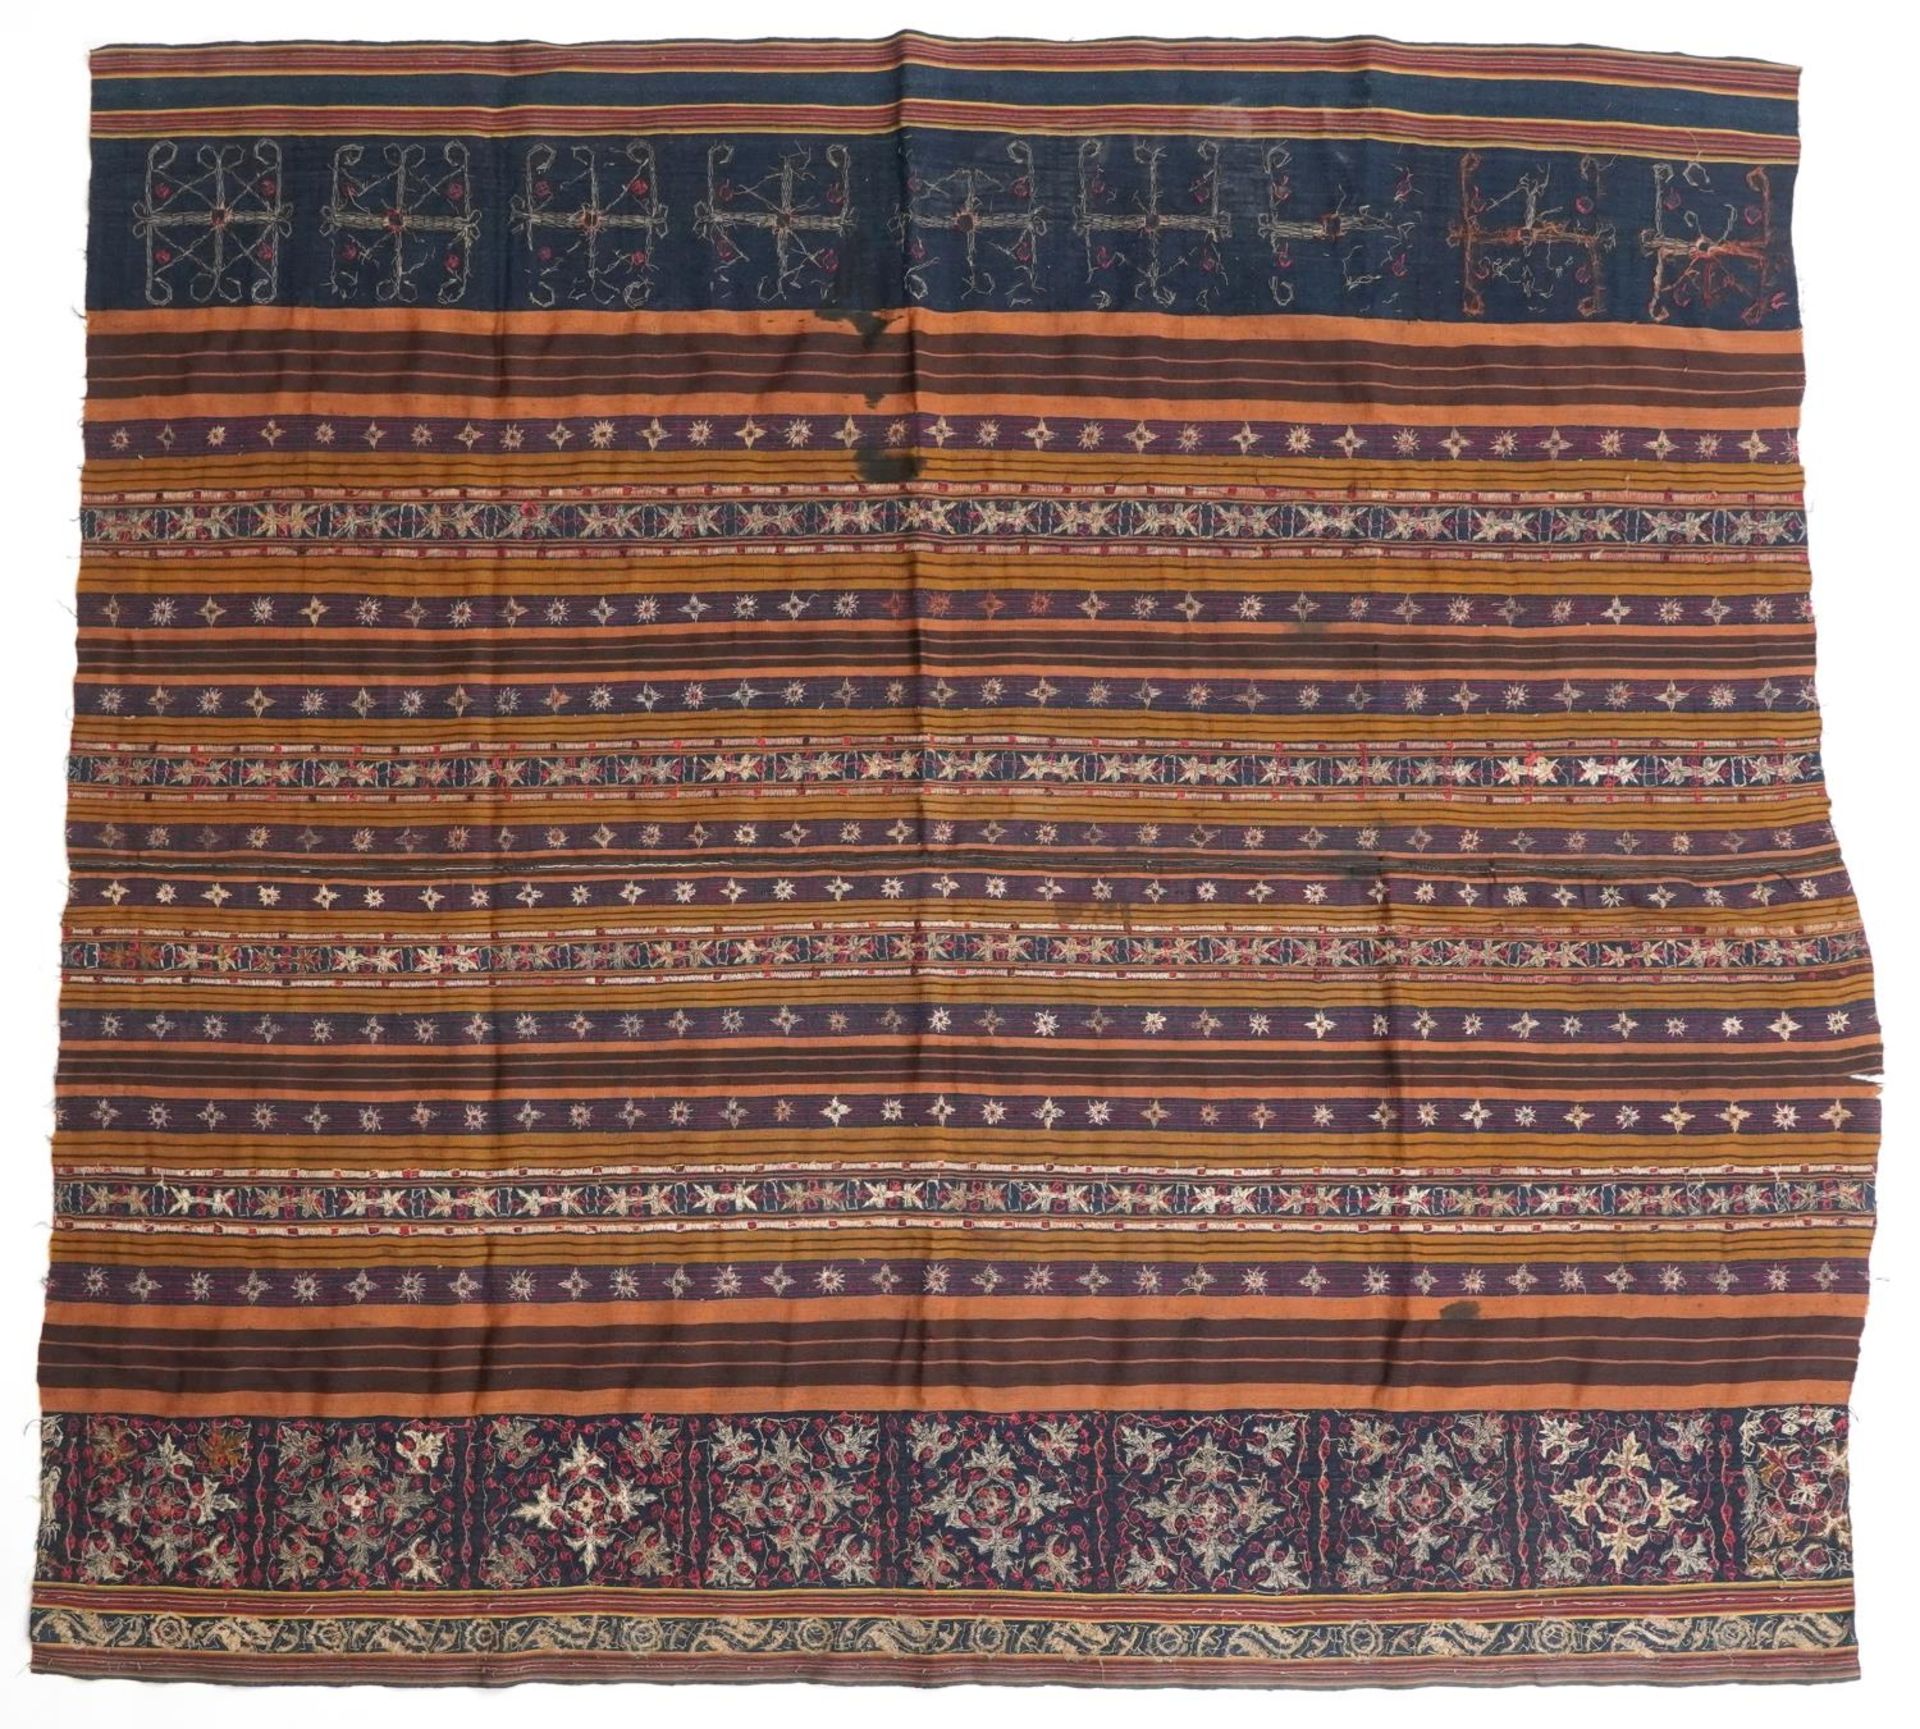 Islamic gold braided textile embroidered with flowers and a robe, the robe 115cm high - Image 7 of 7